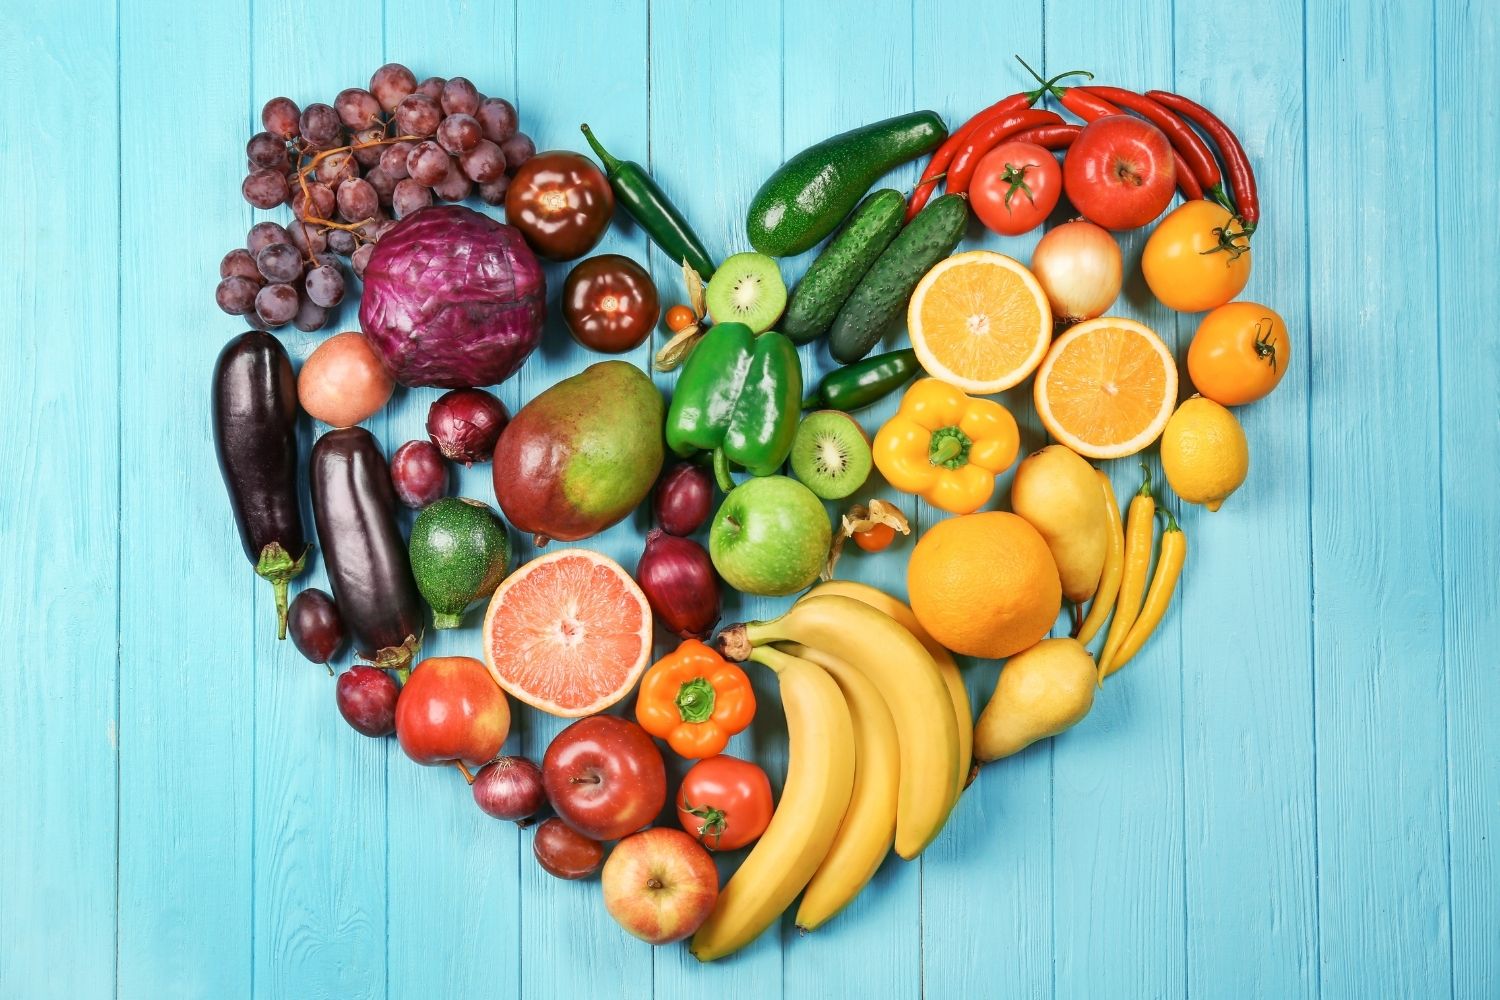 A variety of fruit and vegetables arranged in a heart shape